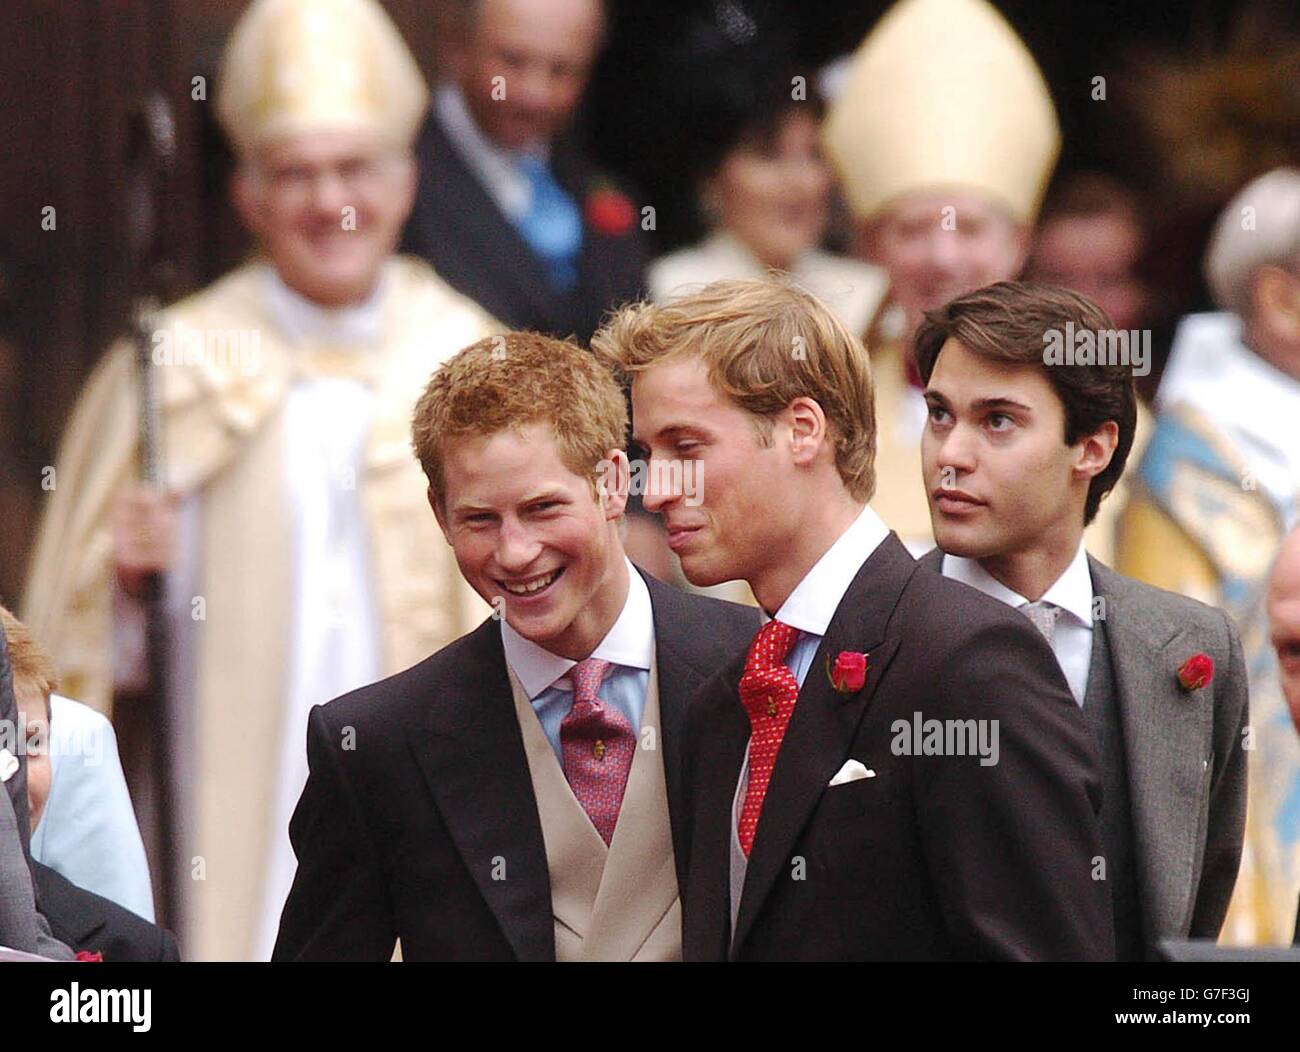 Prince William, Prince Harry and (r) William Van Cutsem as they leave the wedding of Lady Tamara Grosvenor to Edward van Cutsem at Chester Cathedral. Prince William acted as usher at the lavish service attended by 650 guests, including the Queen and the Duke of Edinburgh. The wedding brings together two of Britain's wealthiest families. Lady Tamara Grosvenor, 24, is the eldest daughter of the Duke of Westminster, Britain's richest man, whose land holdings, including swathes of Mayfair and Belgravia, give him a personal fortune estimated at 4 billion. Stock Photo